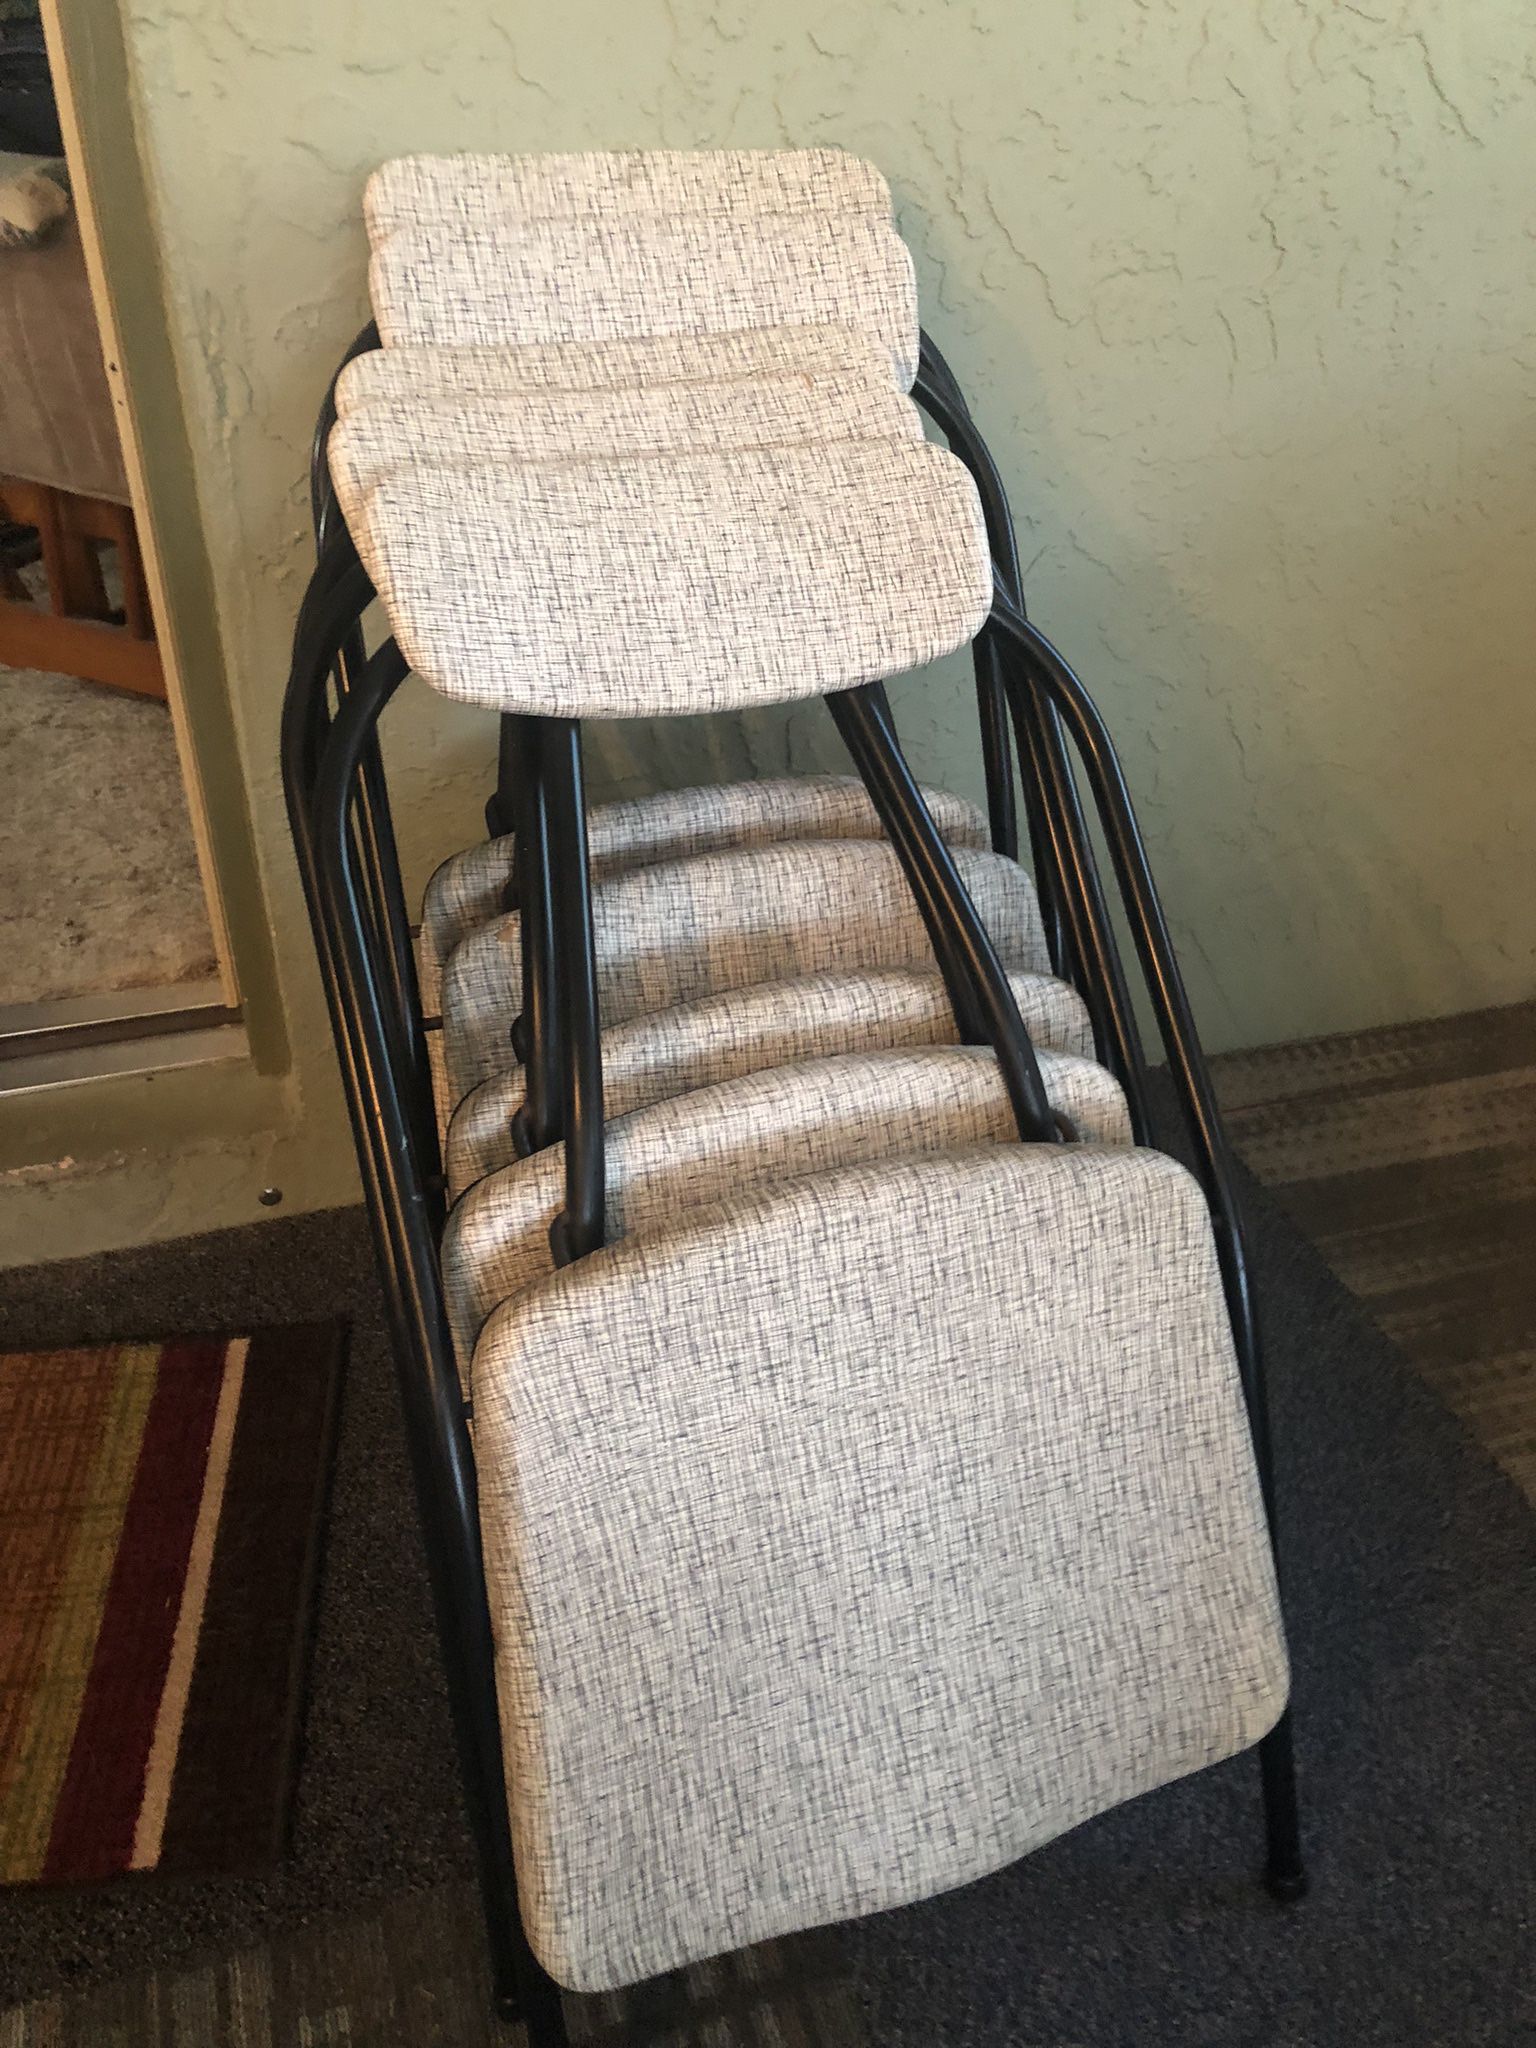 5 Folding Vintage Chairs